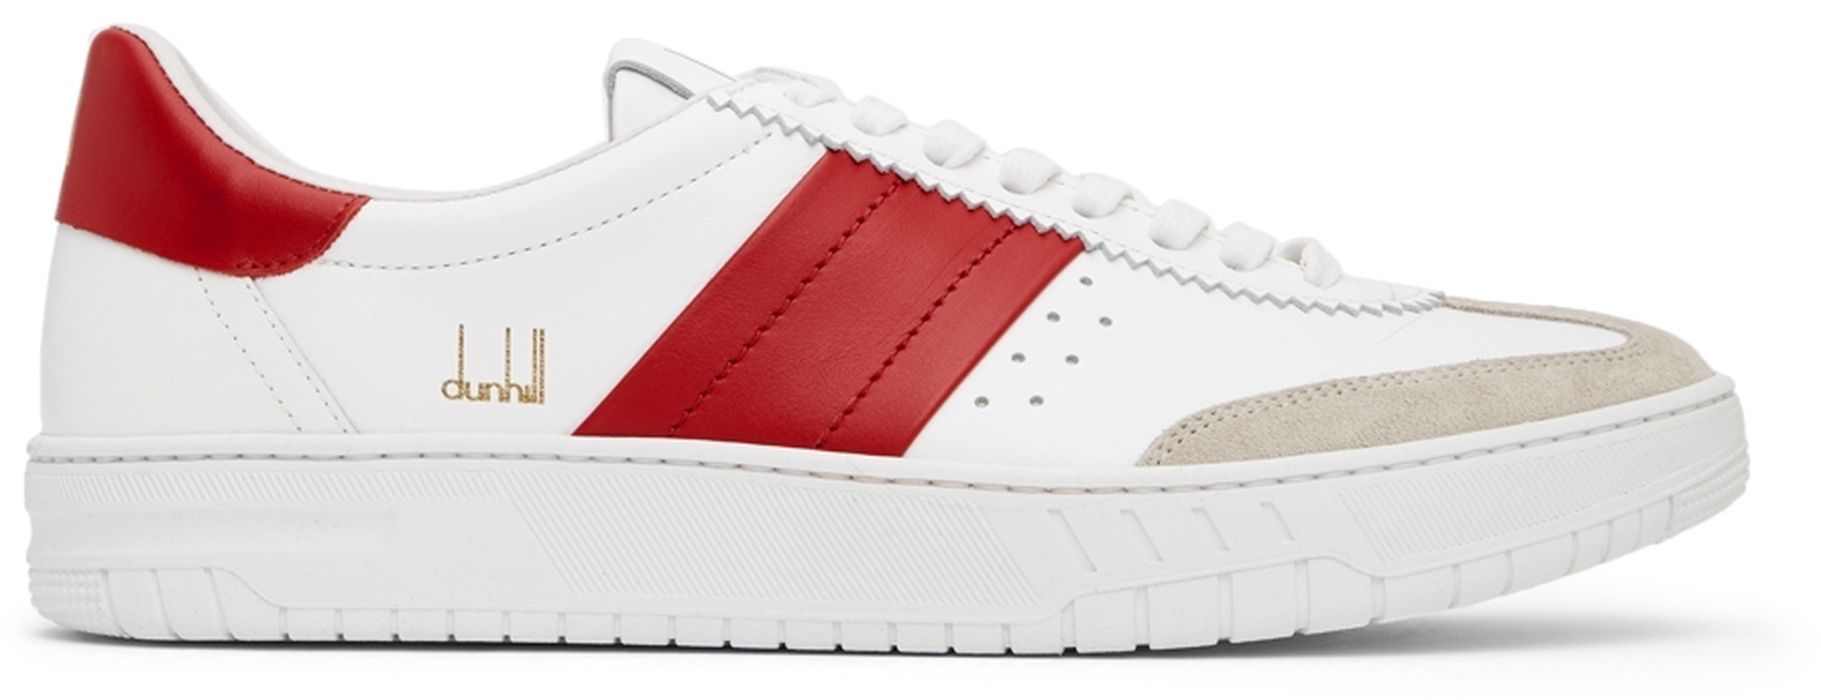 Dunhill White & Red Legacy Sneakers